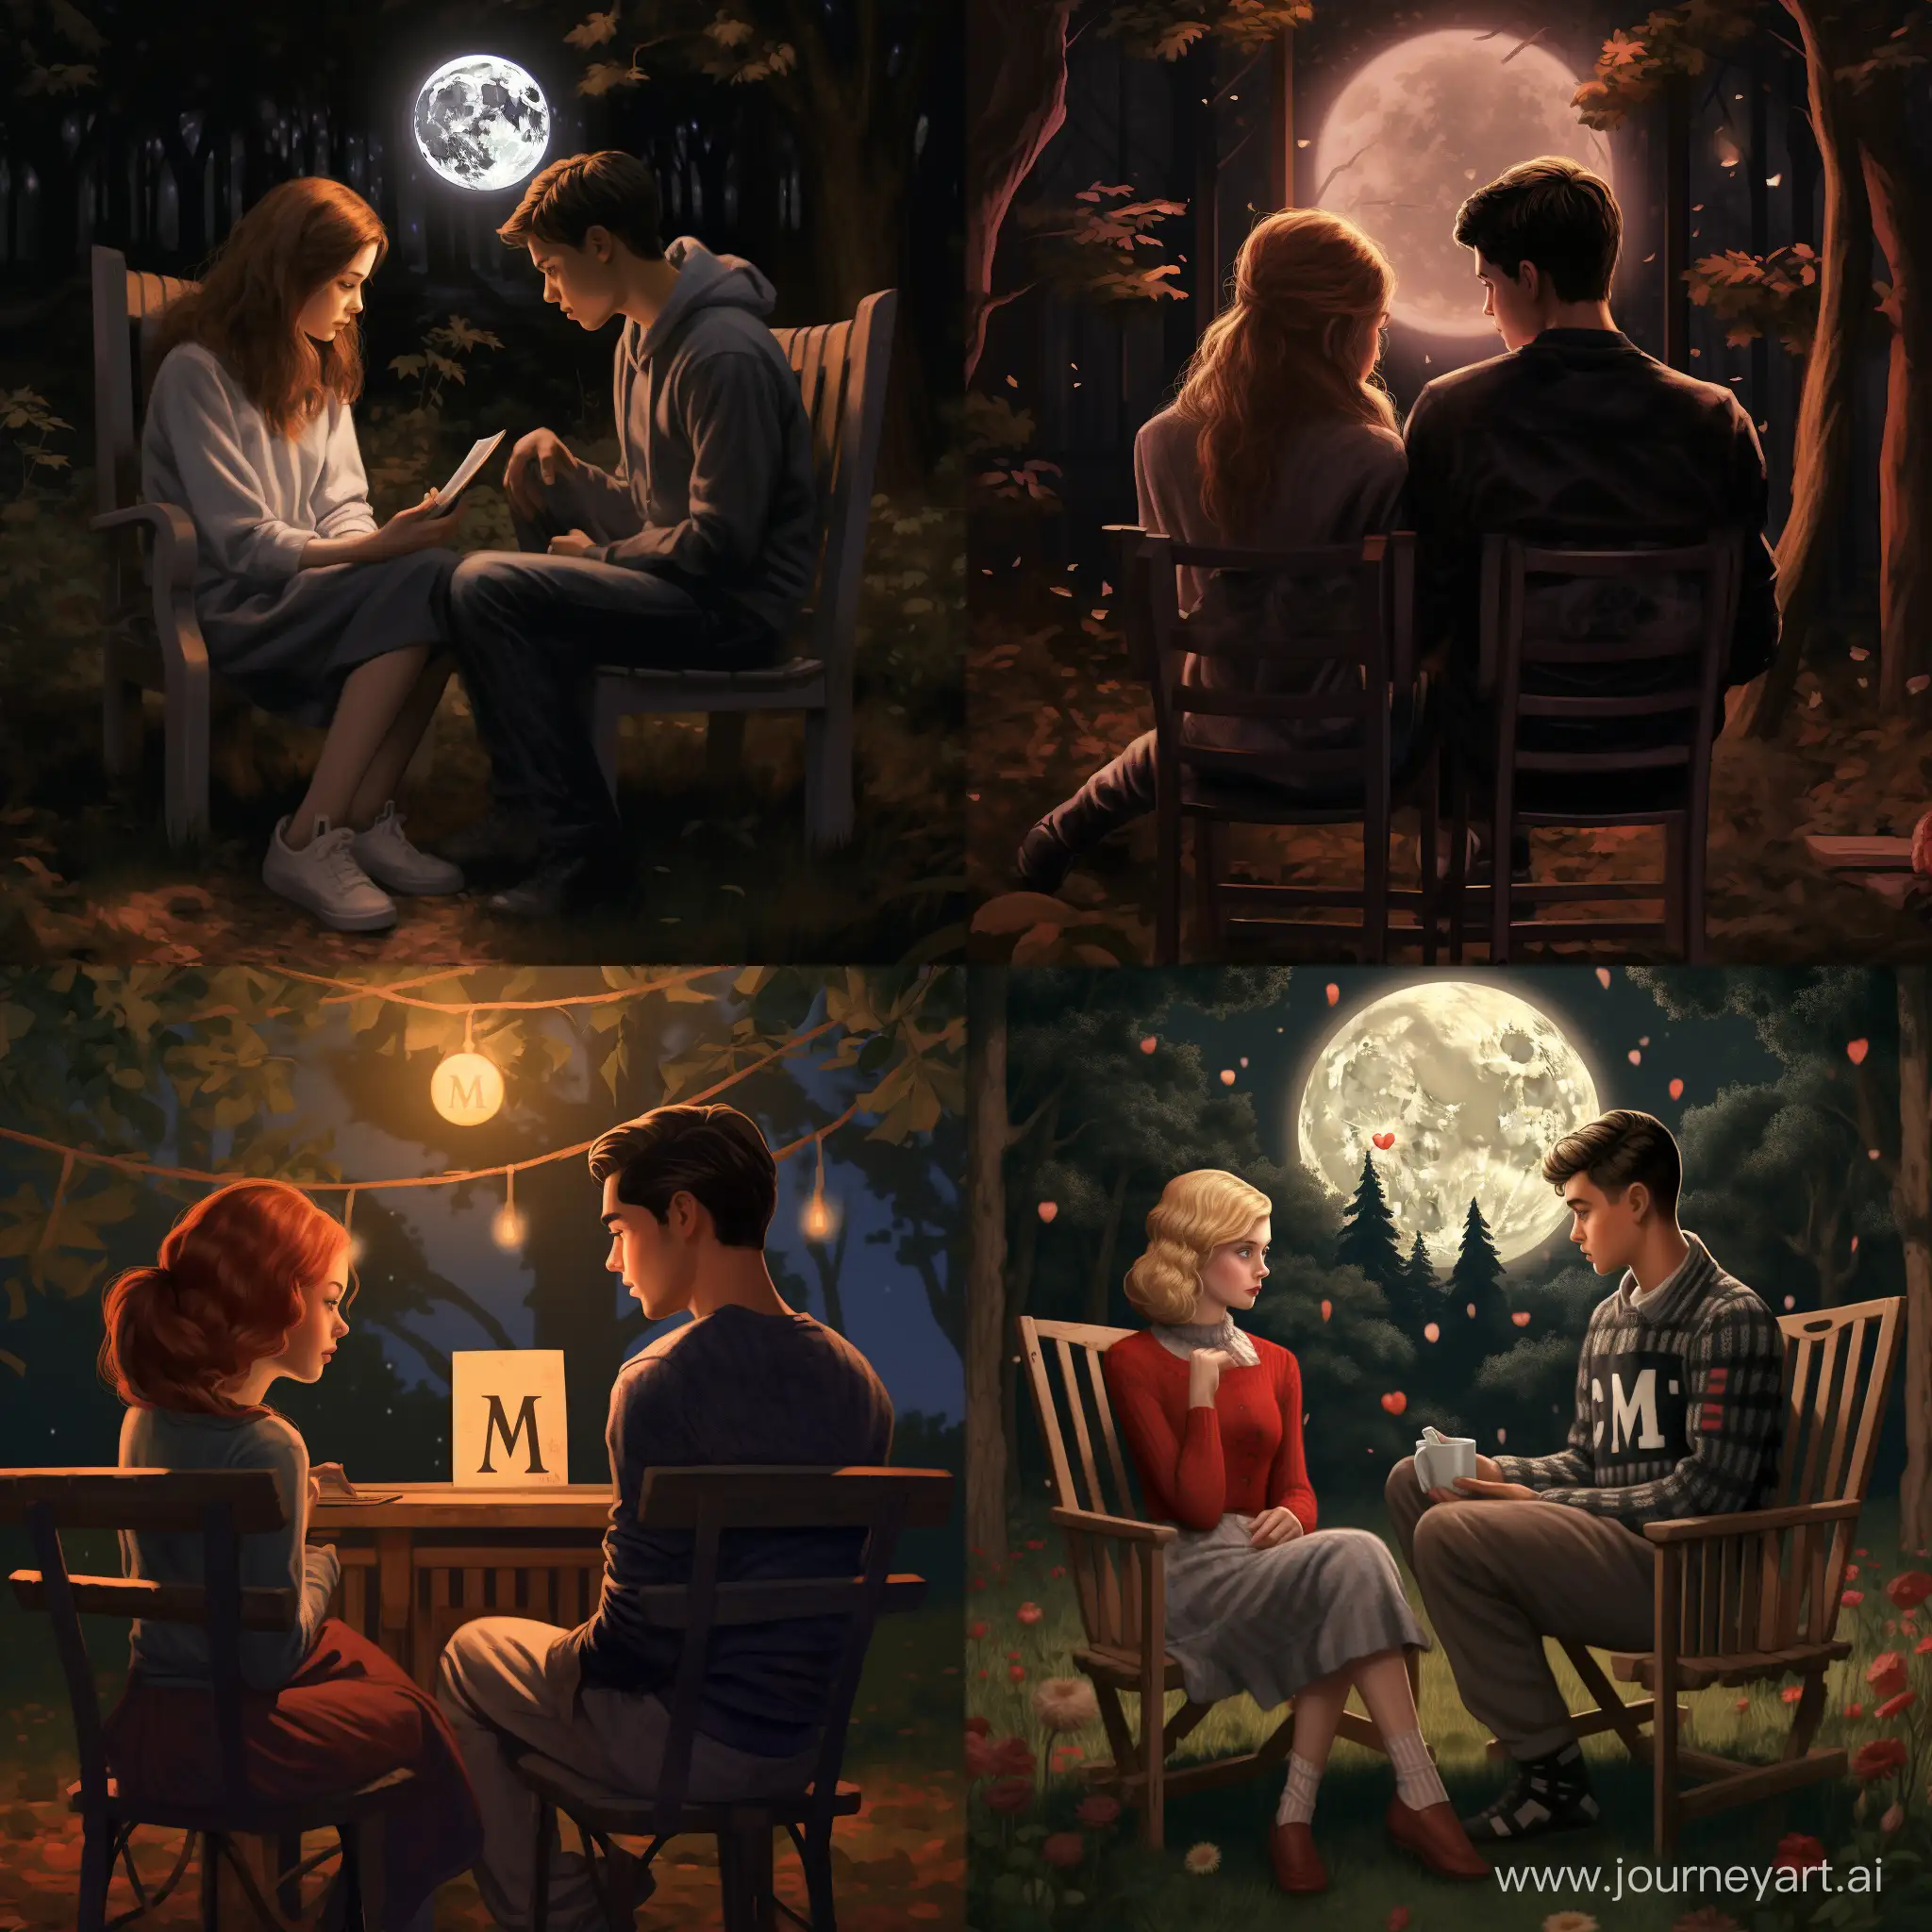 Young-Man-and-Girl-in-Moonlit-Garden-with-Initials-Sweaters